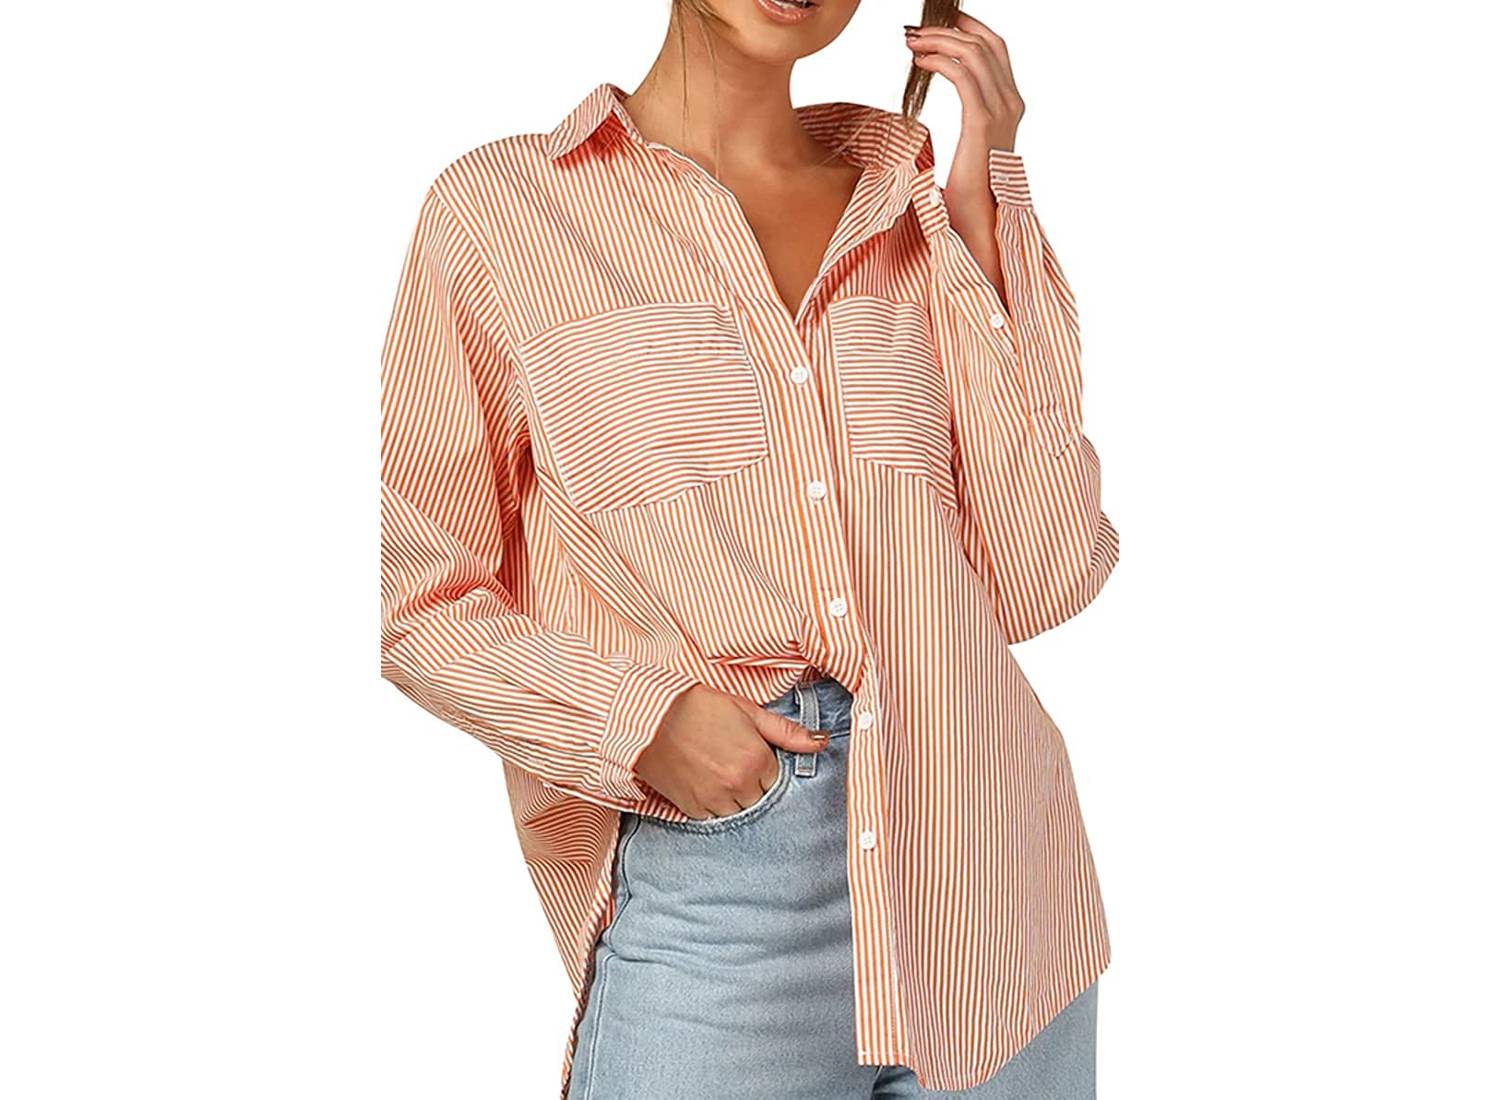 Woman wearing orange and white striped button-down top with denim pants